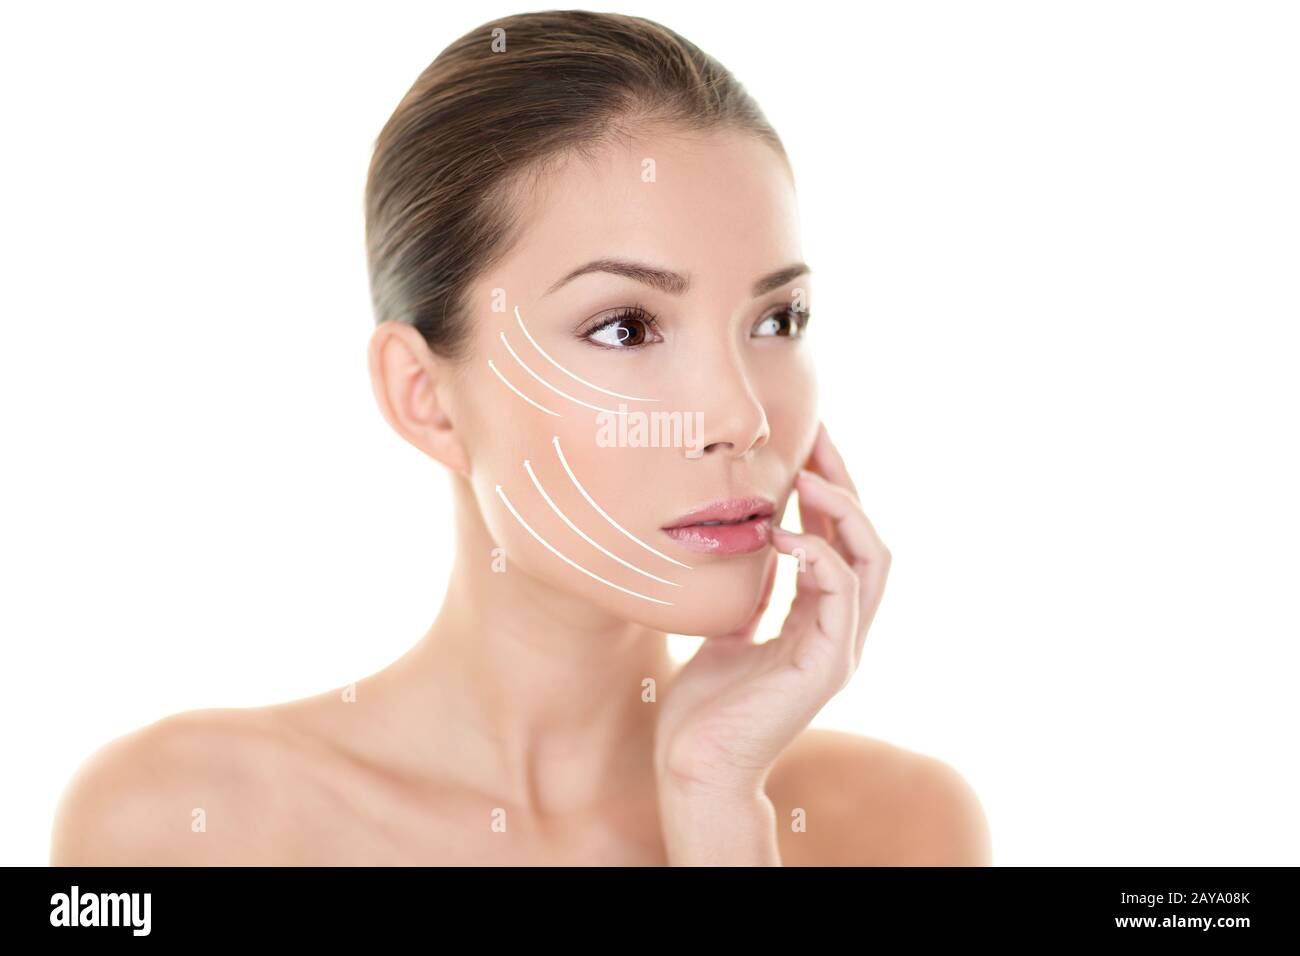 Face lift treatment anti aging skincare beauty woman concept. Skin care Asian model touching face with lifting arrows lines facelift design. Portrait in studio isolated on white background. Stock Photo